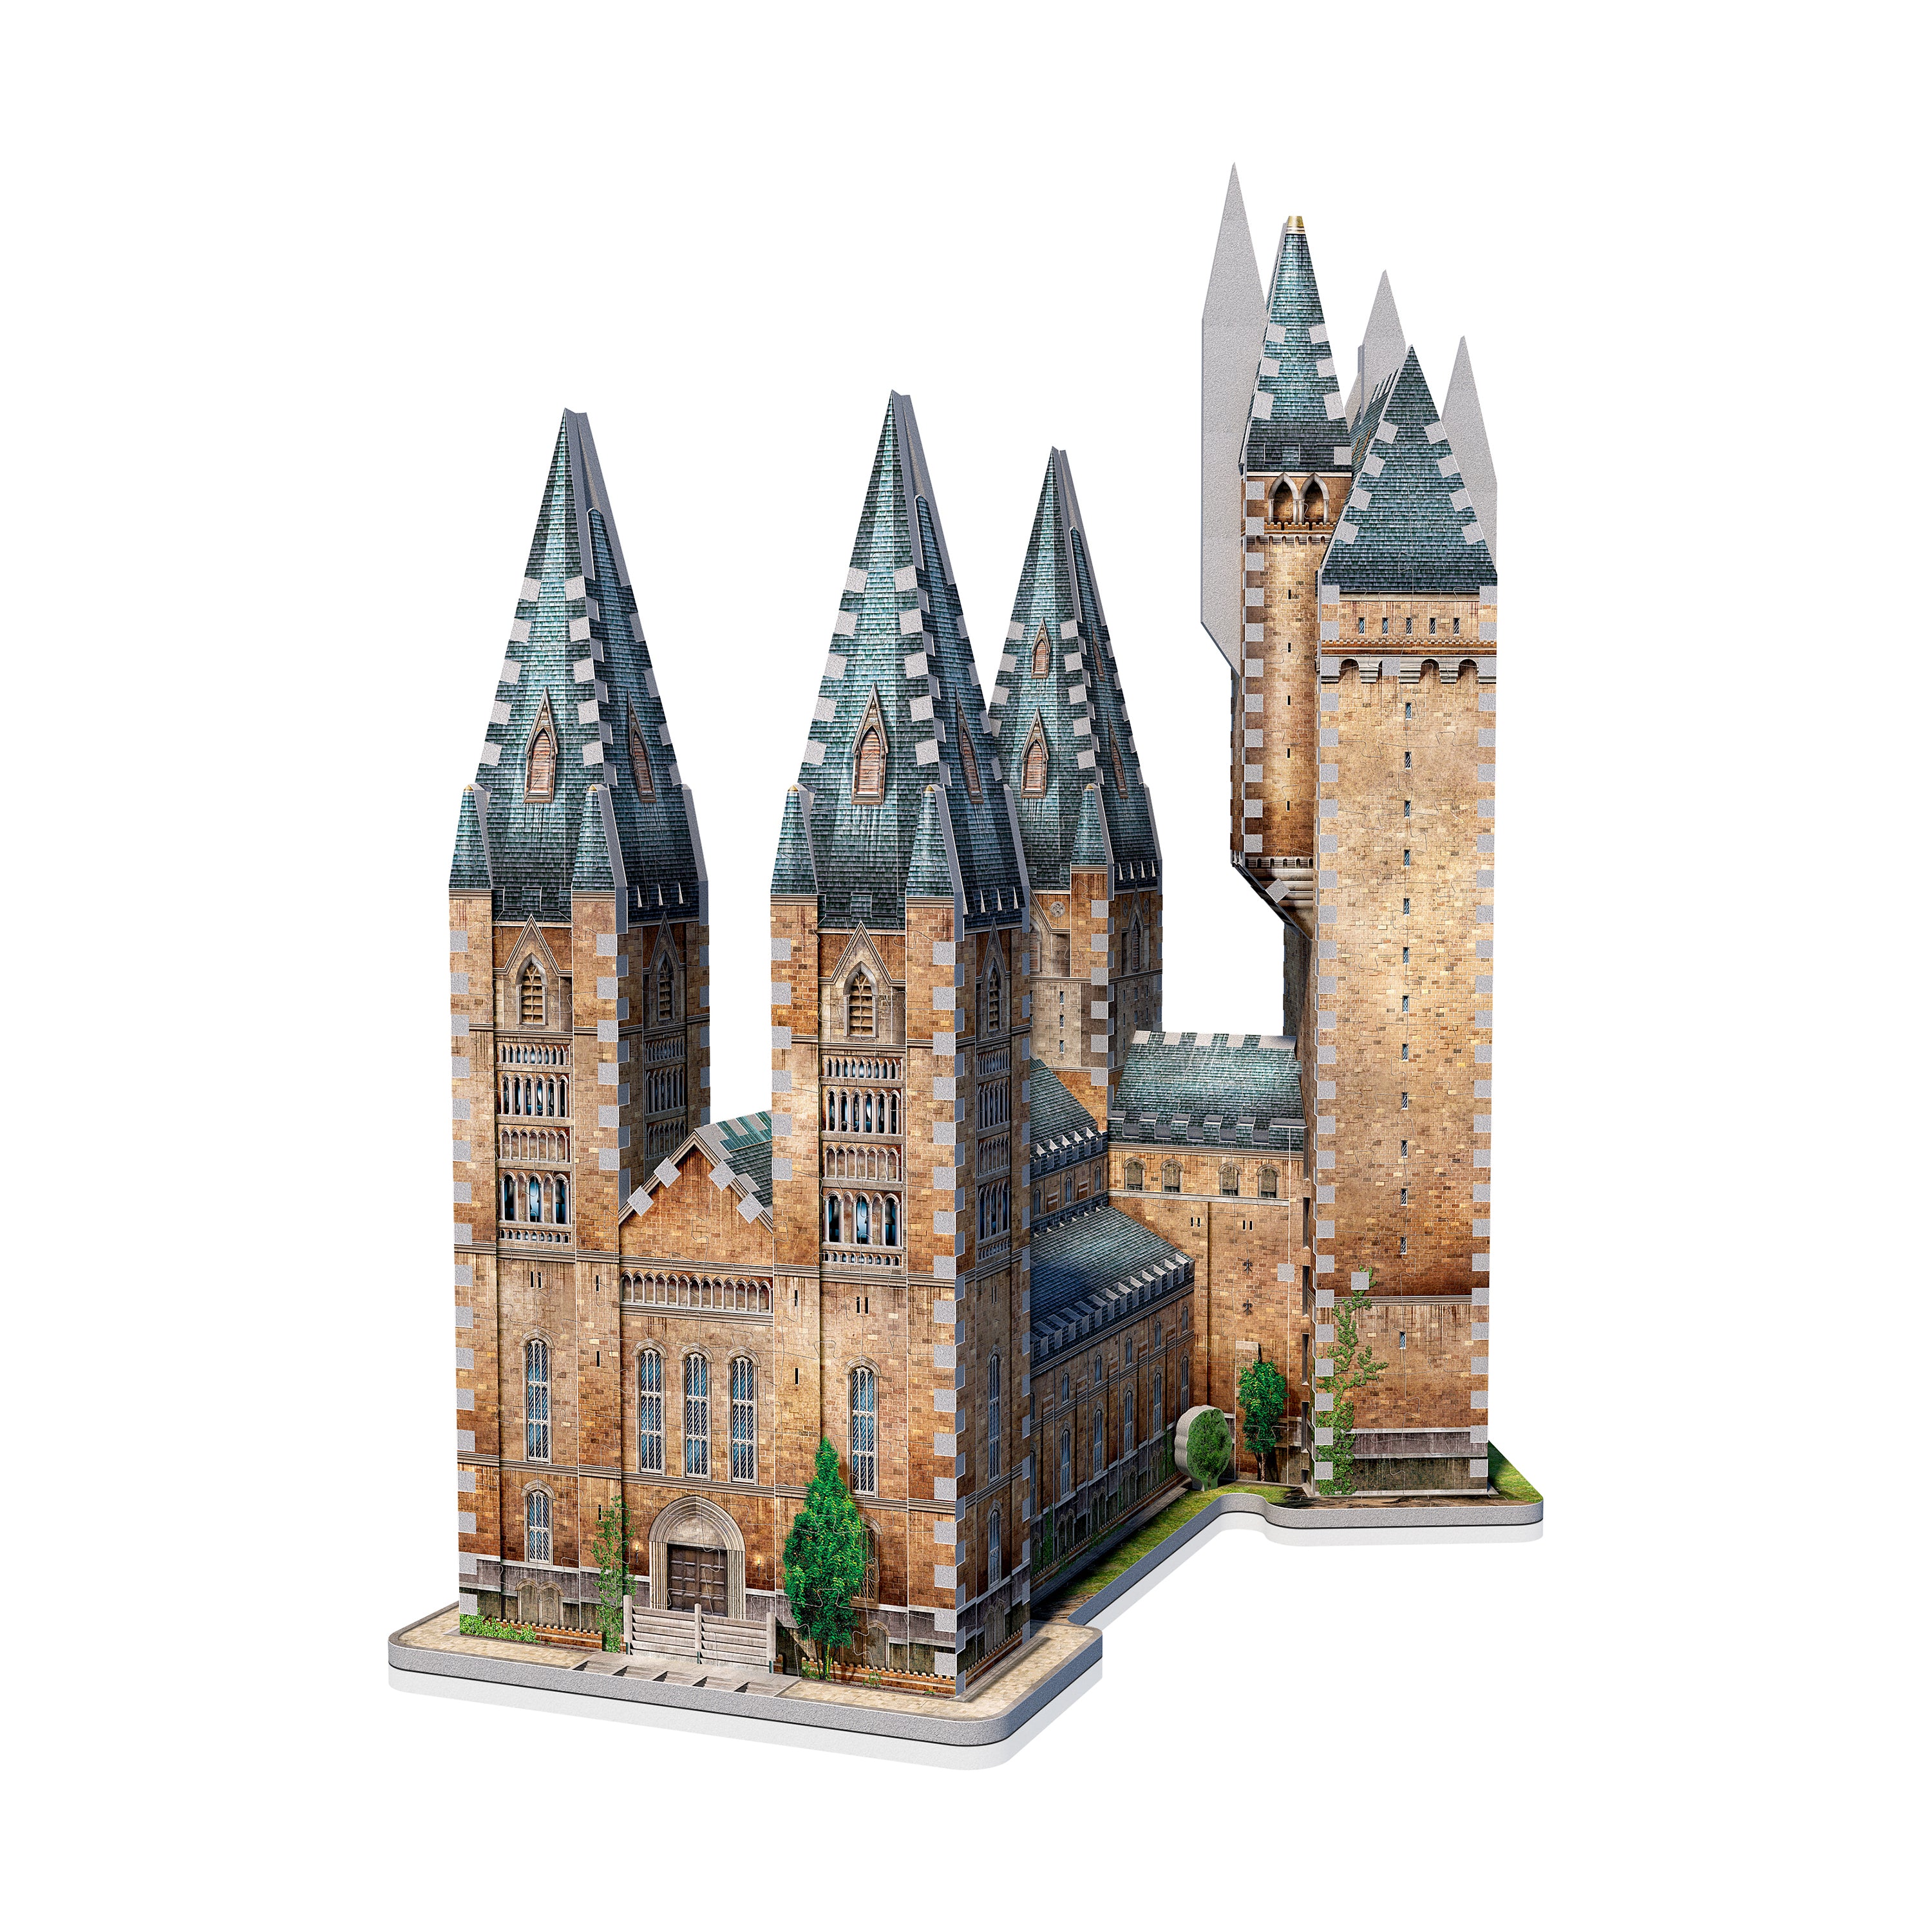 Harry Potter Collection - Hogwarts - Astronomy Tower 3D Puzzle: 875 Pcs